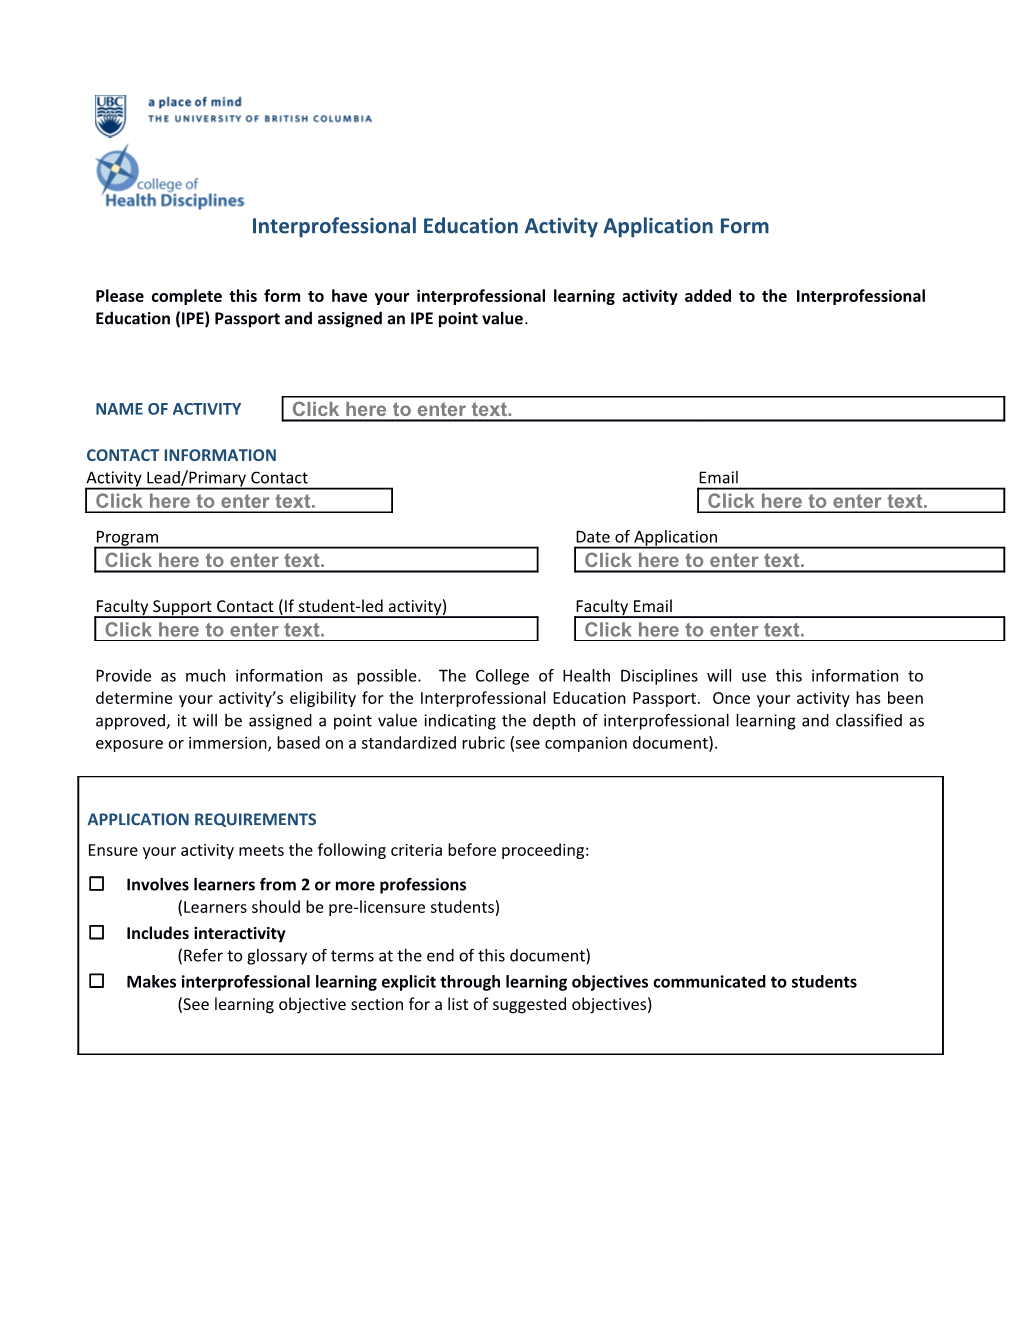 Interprofessional Education Activity Approval Form